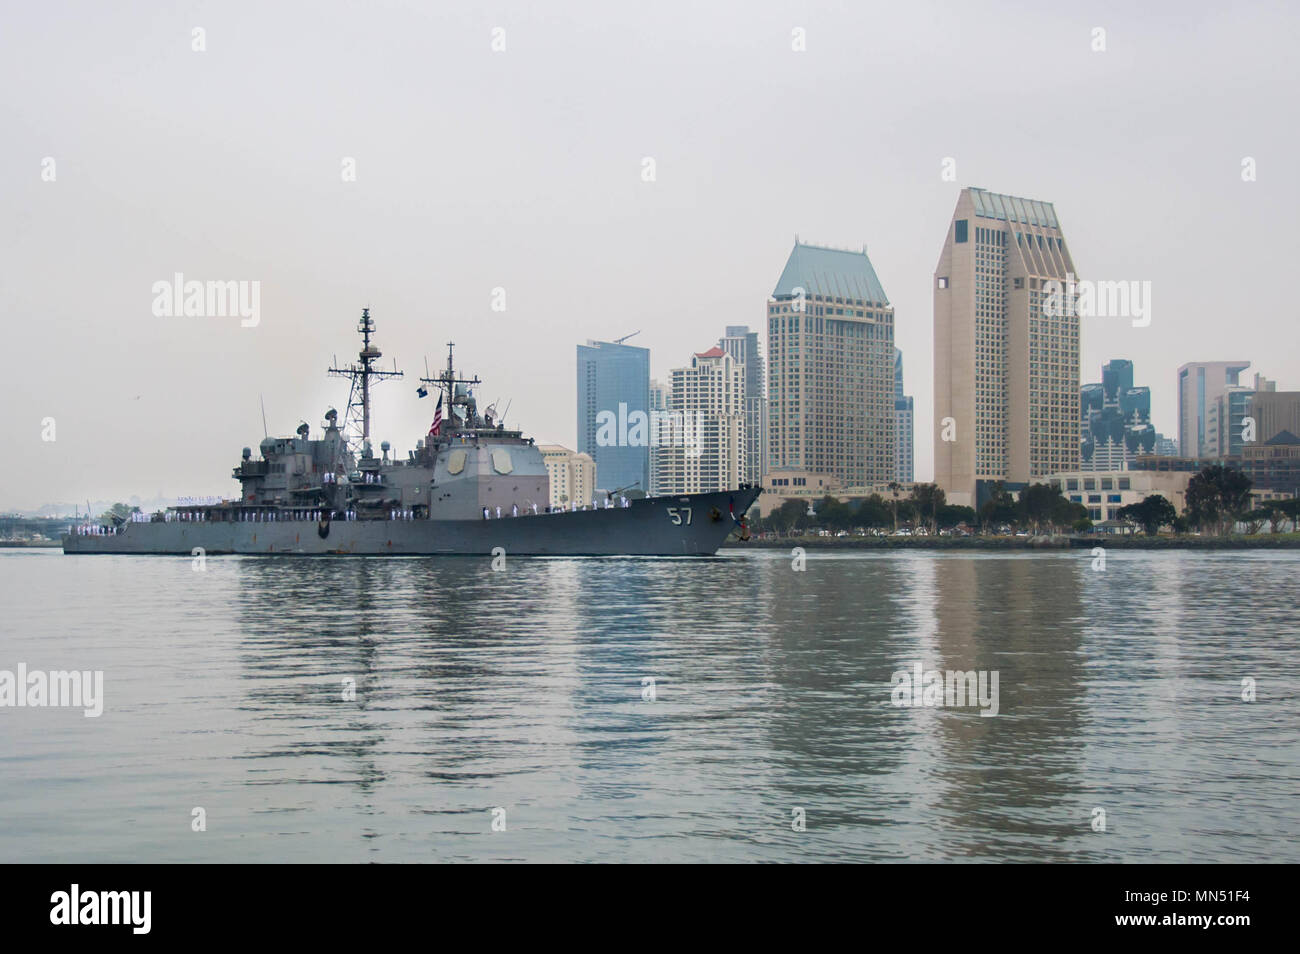 The Ticonderoga-class guided-missile cruiser USS Lake Champlain (CG 57) arrives in San Diego May 8. Lake Champlain was deployed to the Western Pacific as part of the Carl Vinson Strike Group. (U.S. Navy photo by Mass Communication Specialist 2nd Class Nancy C. diBenedetto) Stock Photo